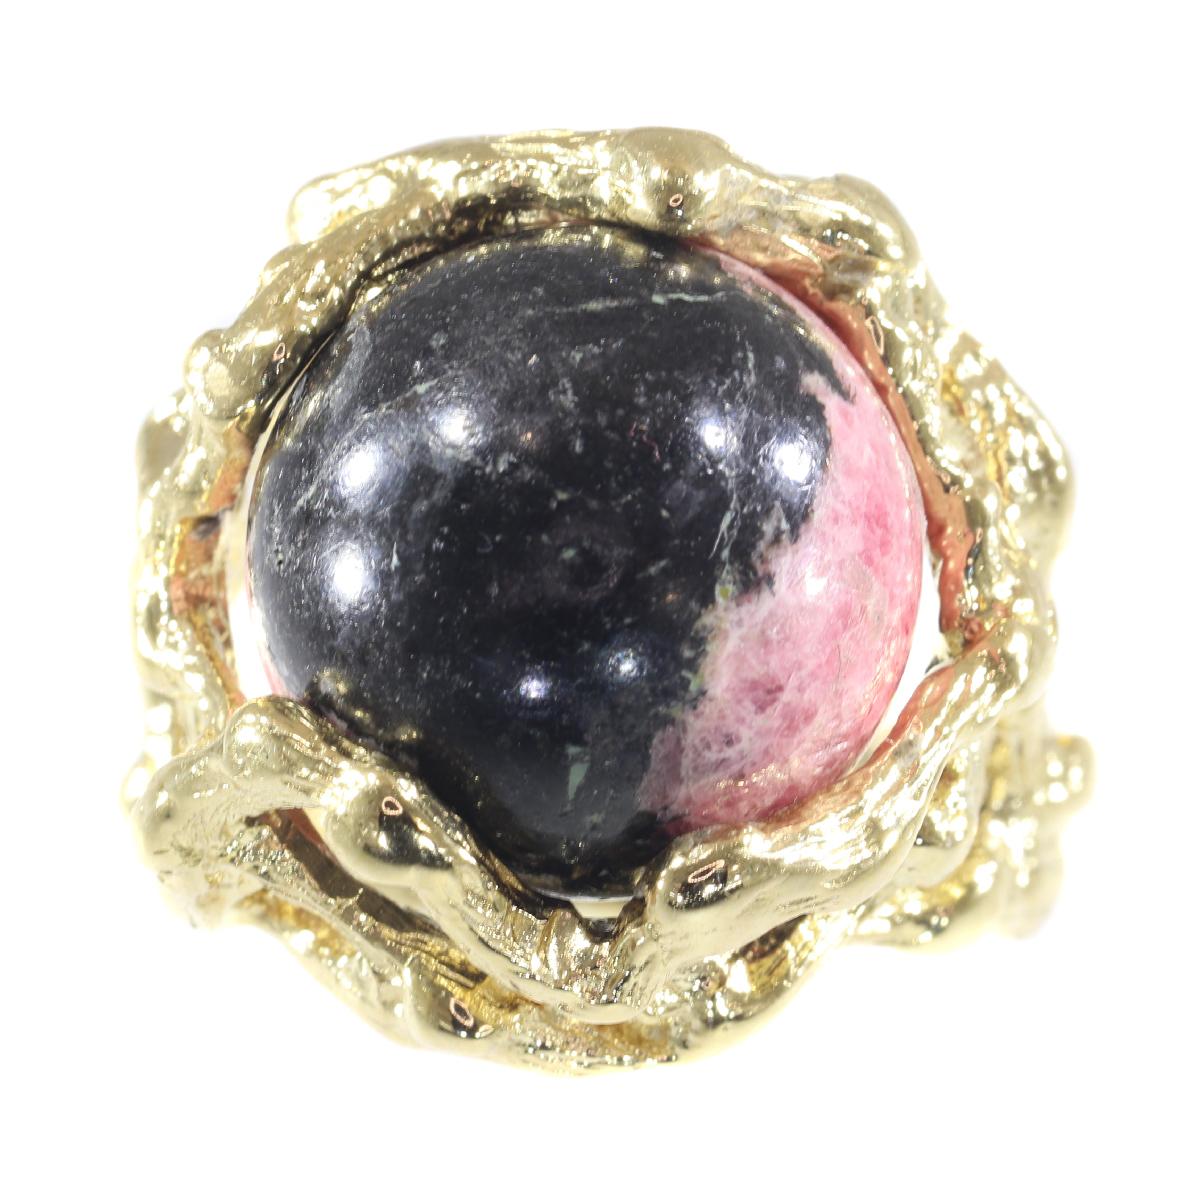 Retro Vintage 1960s Gold Art Ring with Interchangeable Precious Stones Spheres For Sale